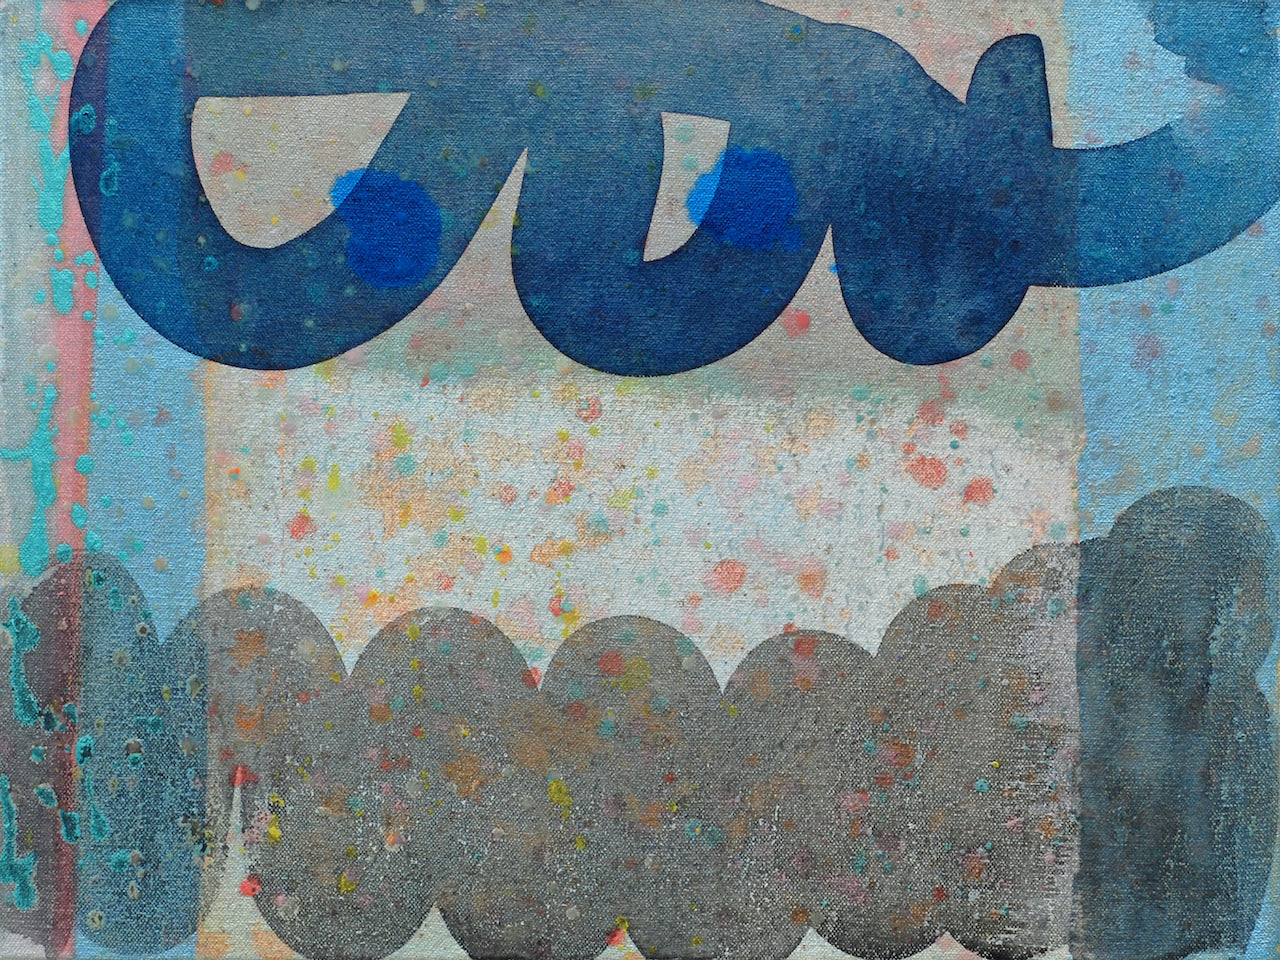 Tones of blue with vibrant darker blue shapes by Cornish artist Ella Carty